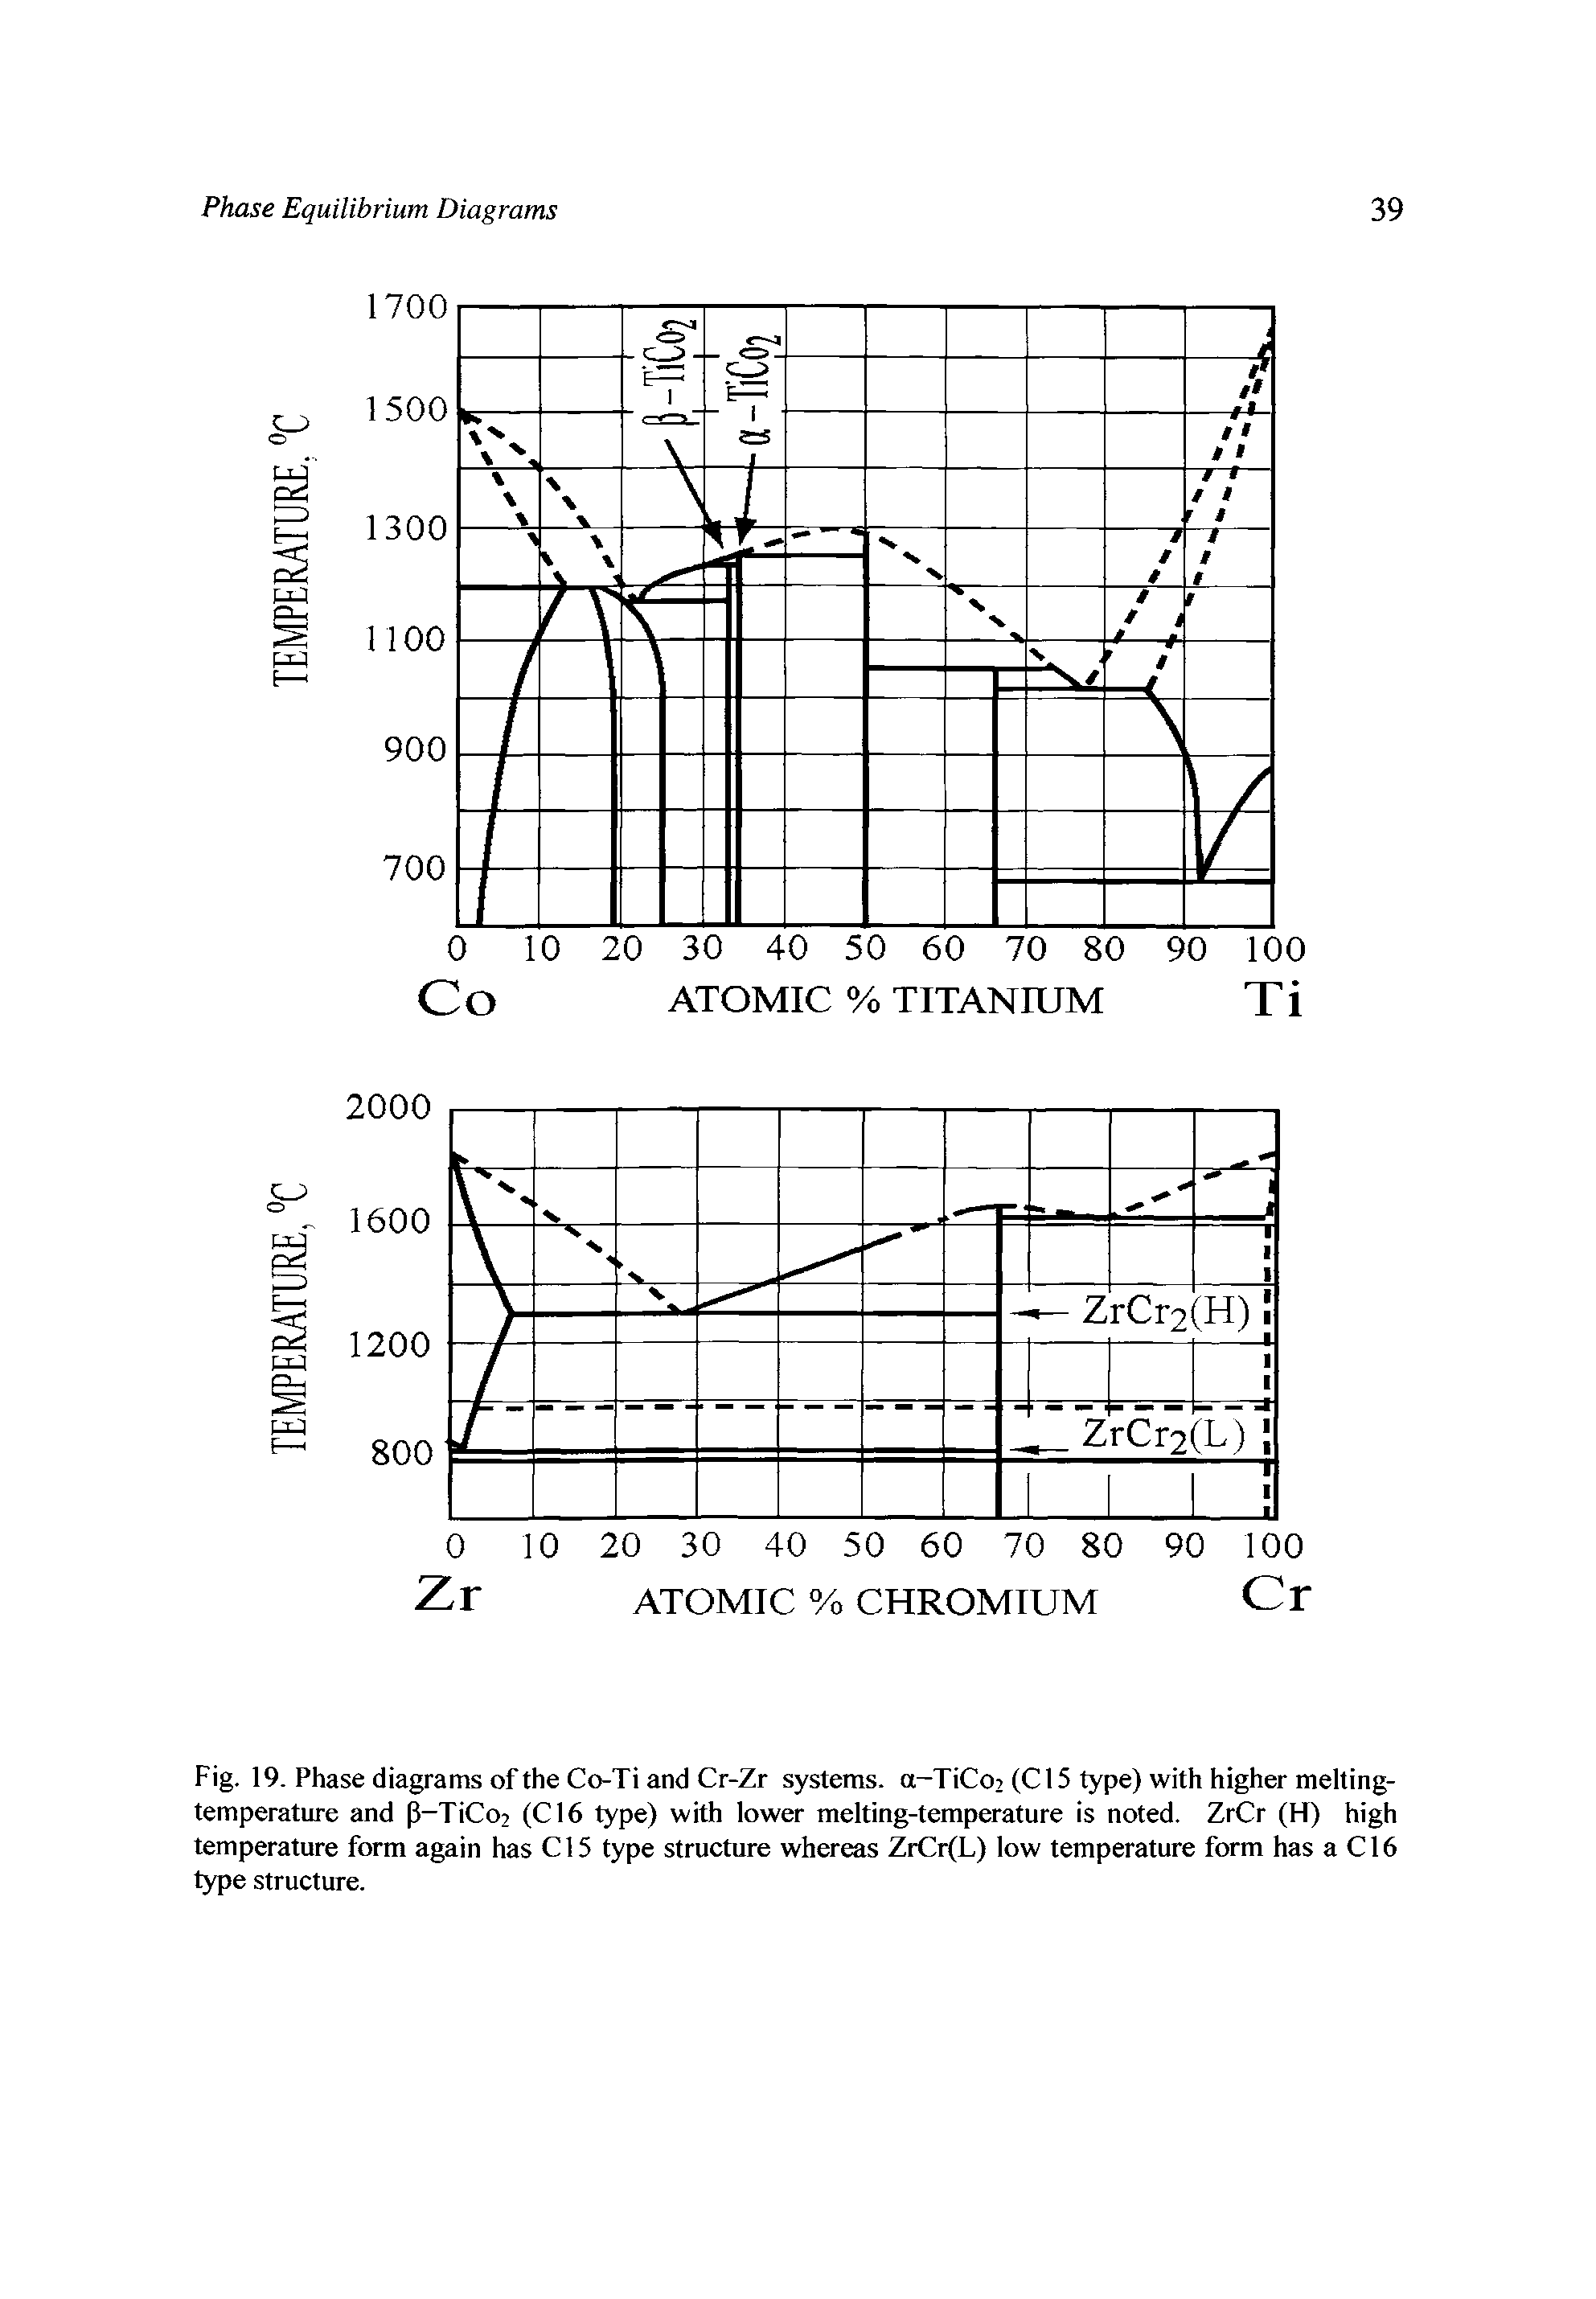 Fig. 19. Phase diagrams of the Co-Ti and Cr-Zr systems. a-TiCo (C15 type) with higher melting-temperature and p-TiCo2 (Cl6 type) with lower melting-temperature is noted. ZrCr (H) high temperature form again has Cl5 type structure whereas ZrCr(L) low temperature form has a C16 type structure.